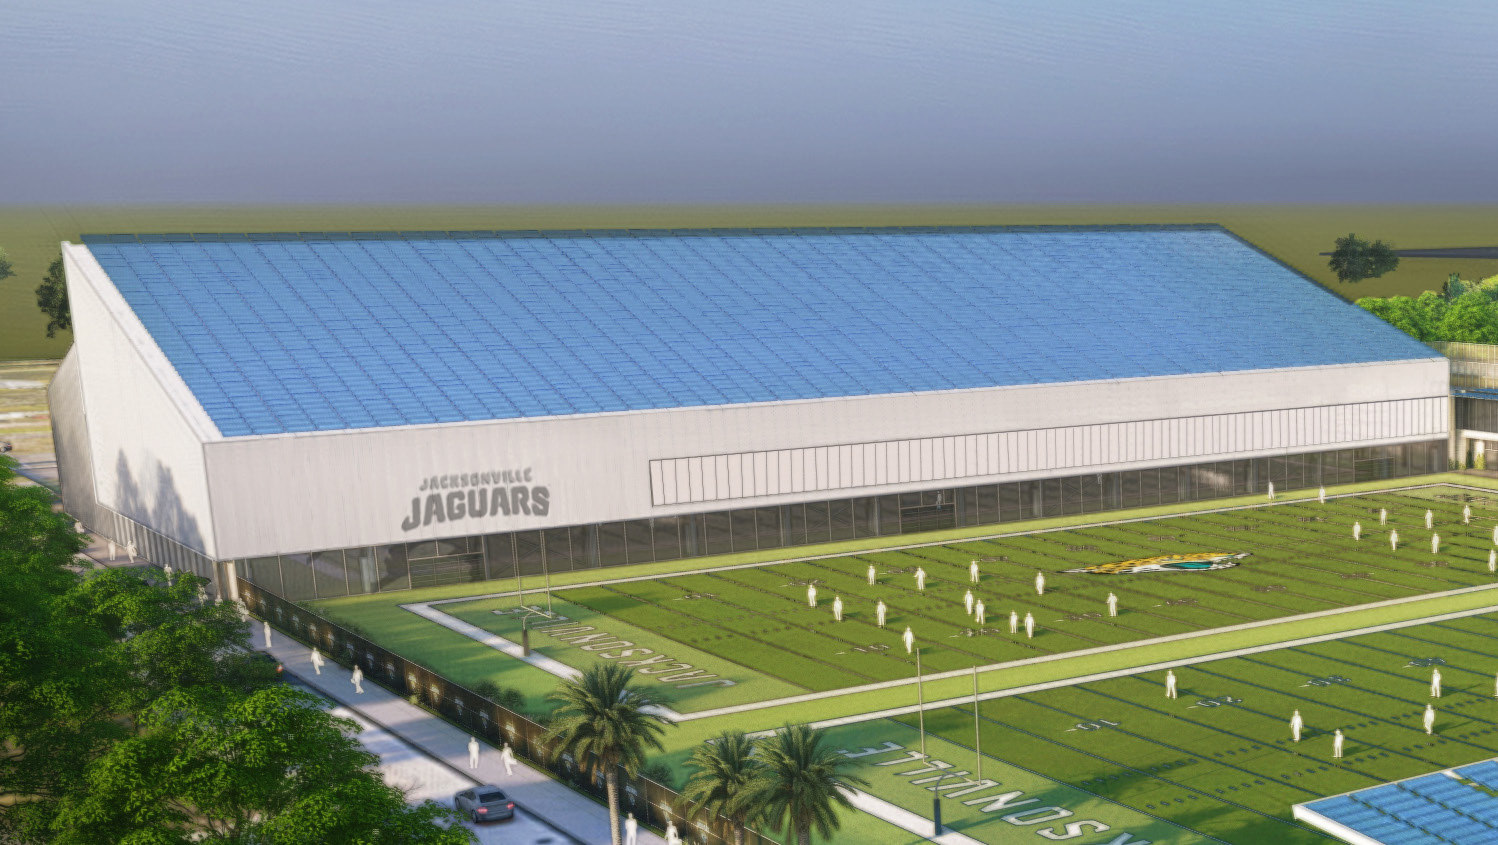 The football performance center will have an indoor practice field.